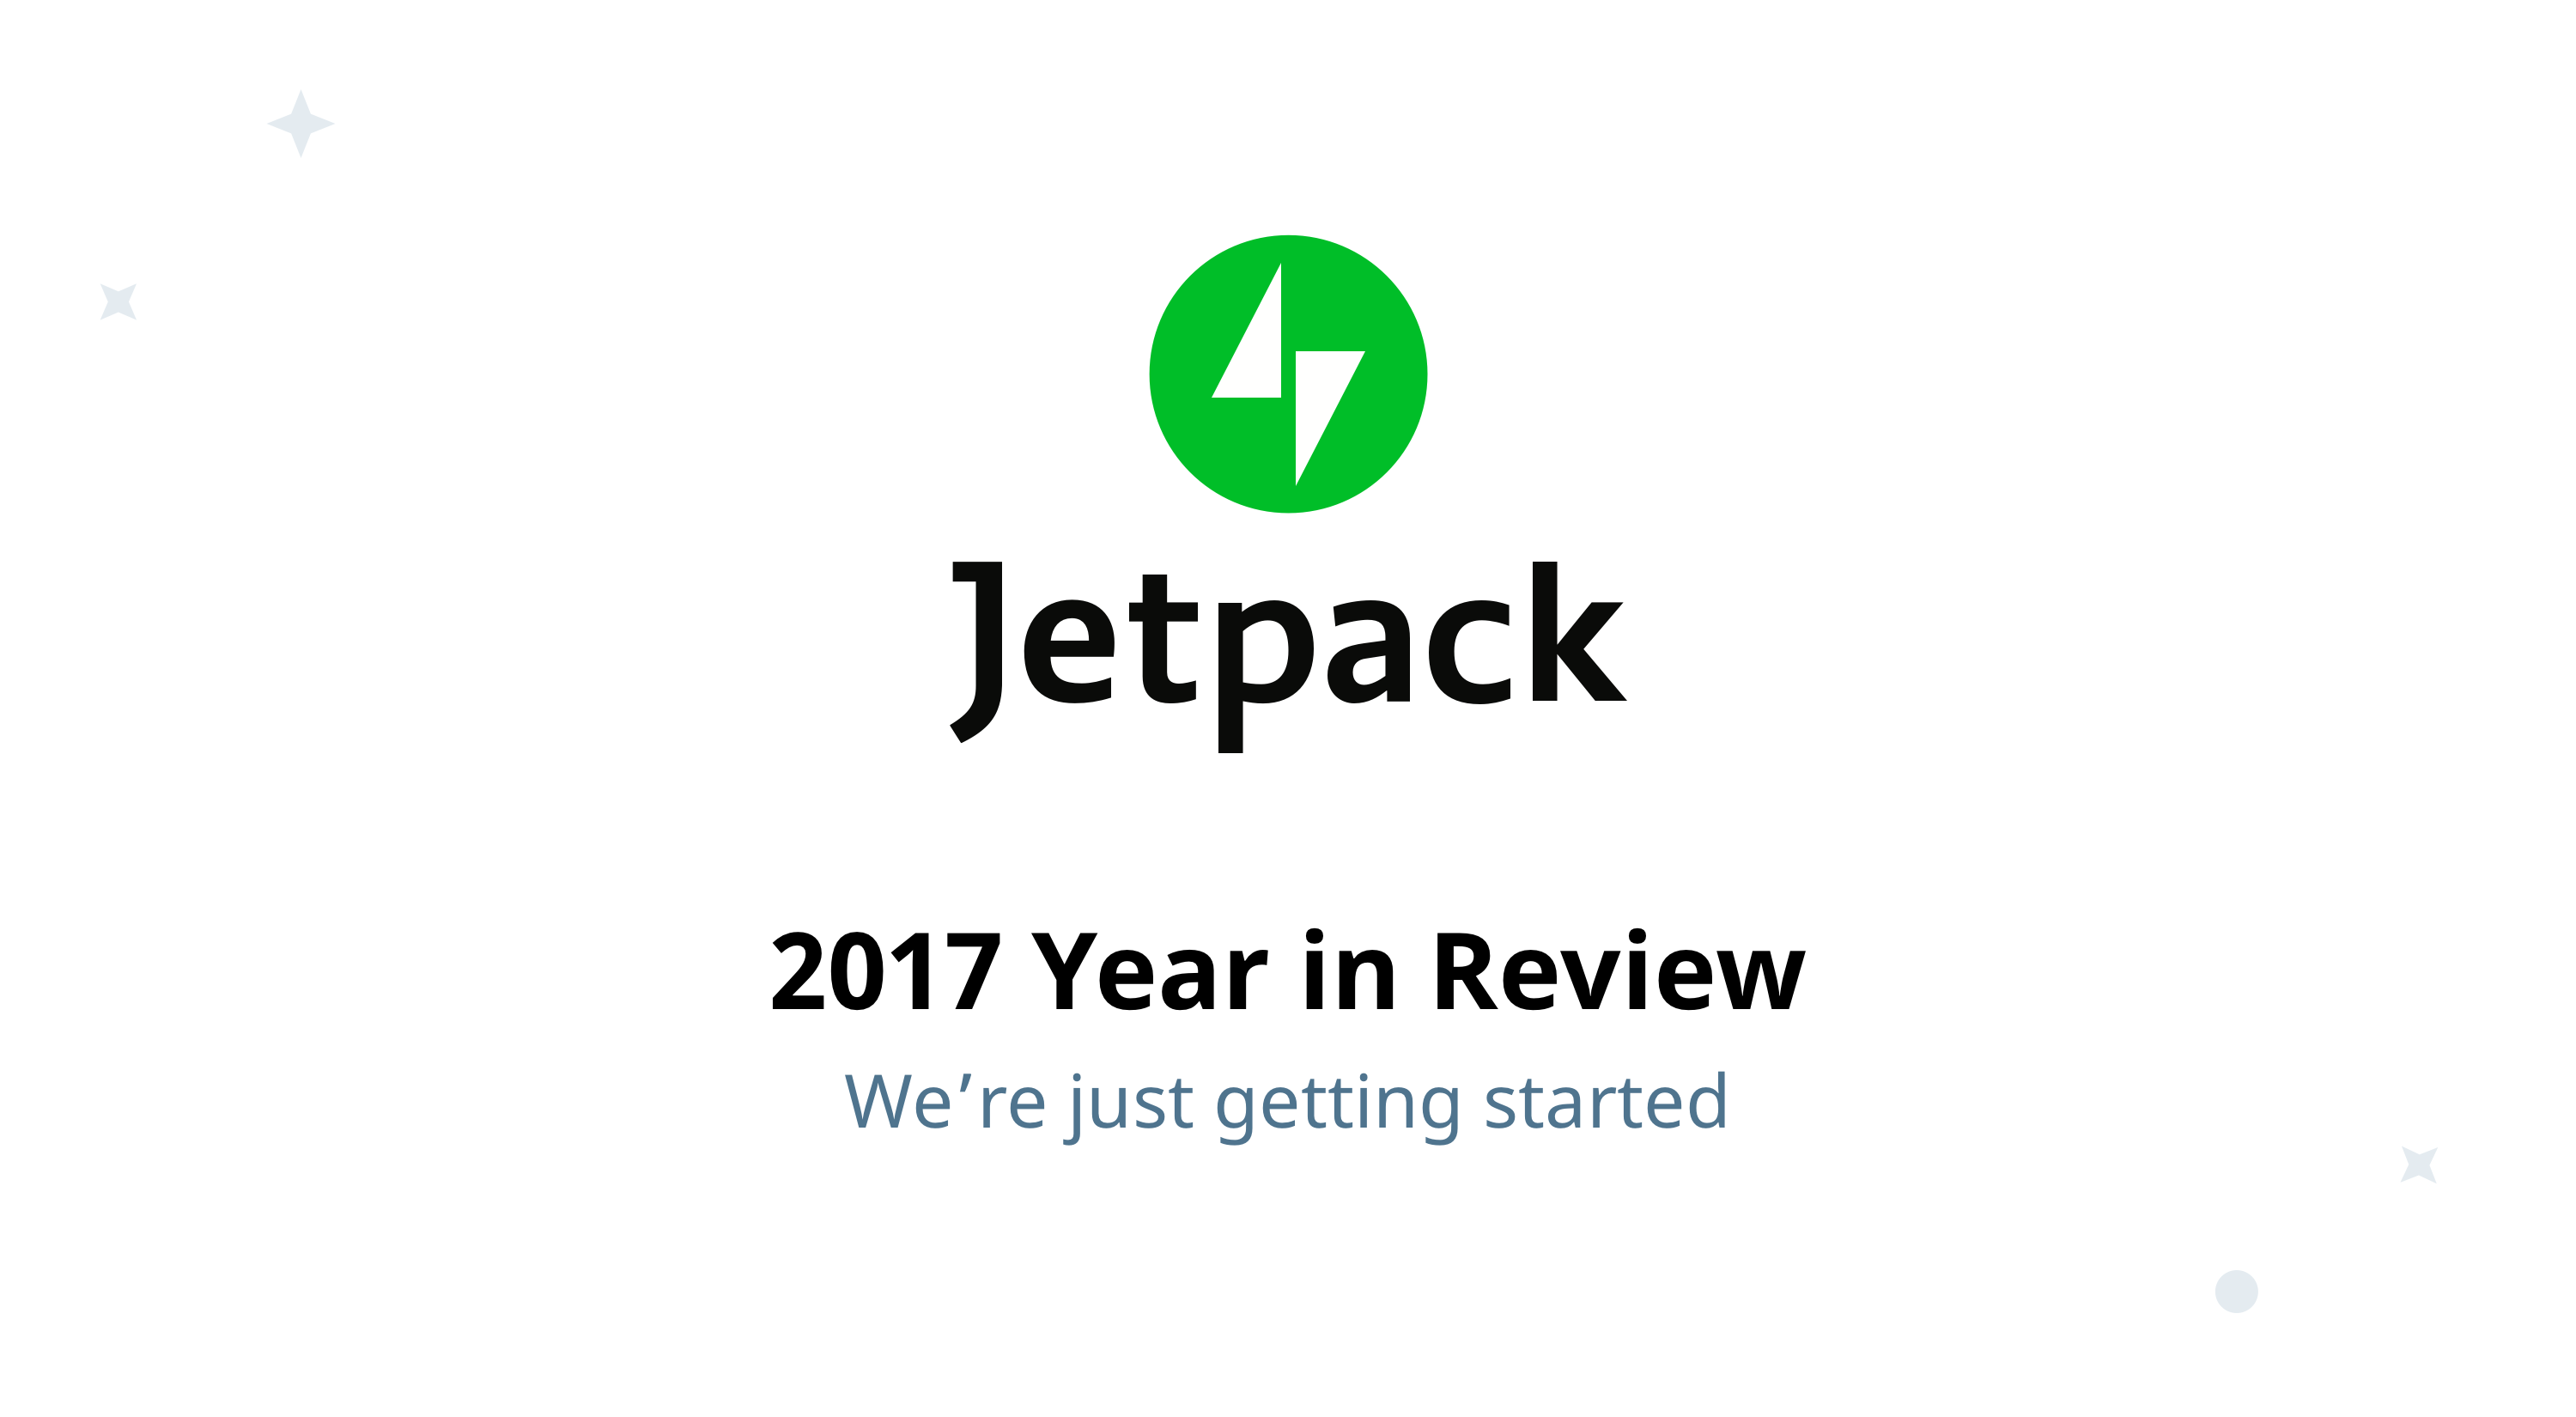 Jetpack's 2017 in Review